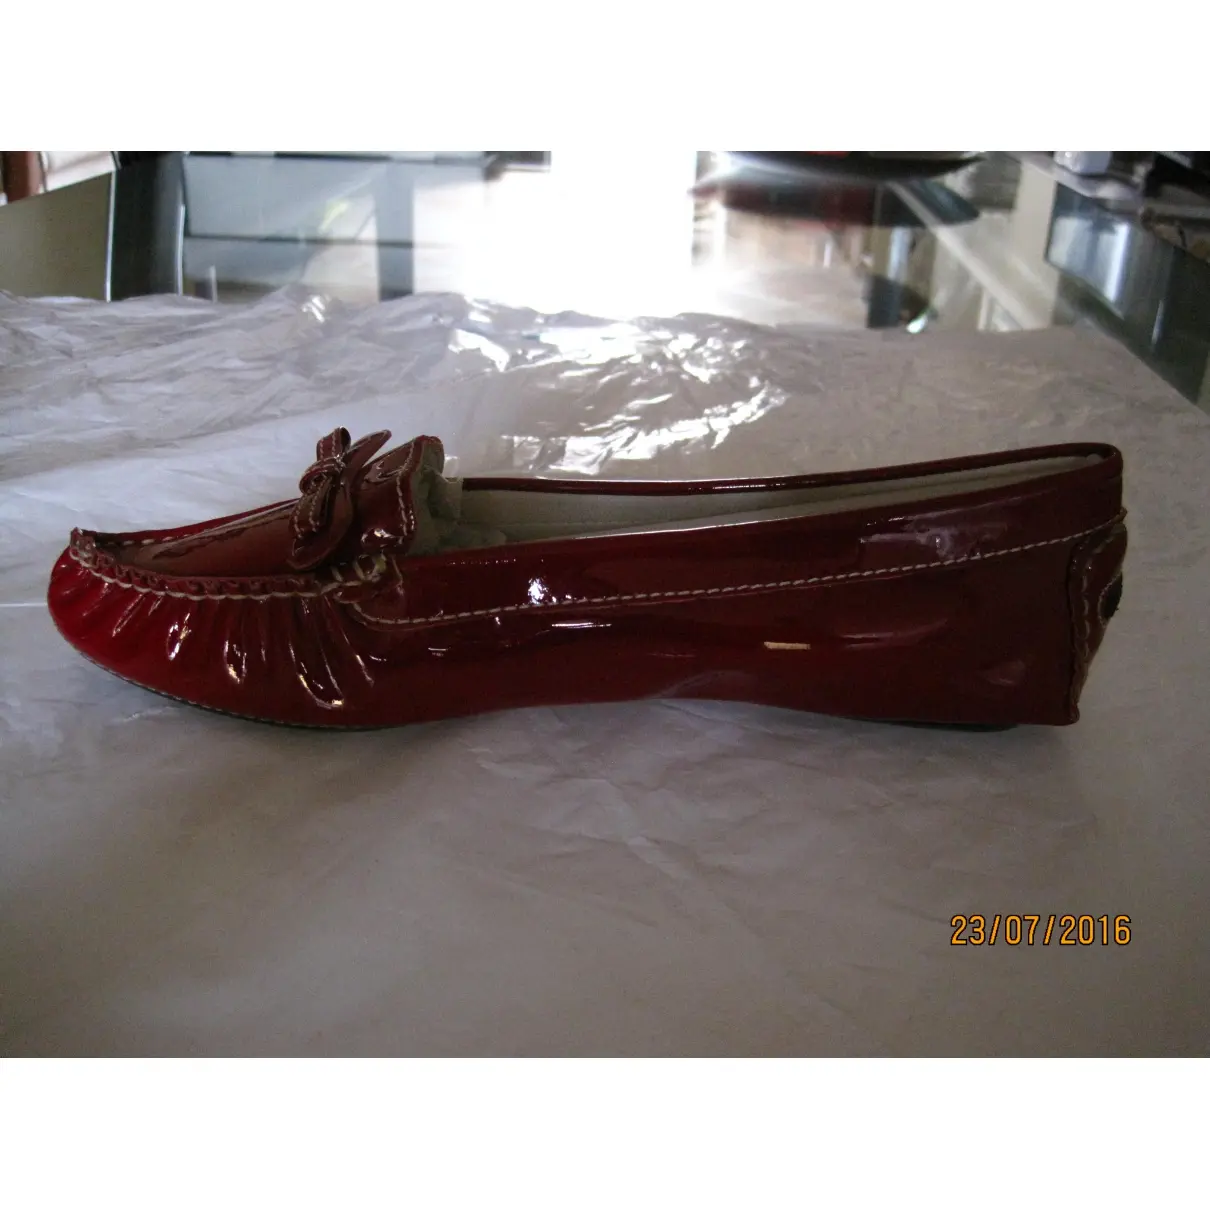 Marc Jacobs Patent leather ballet flats for sale